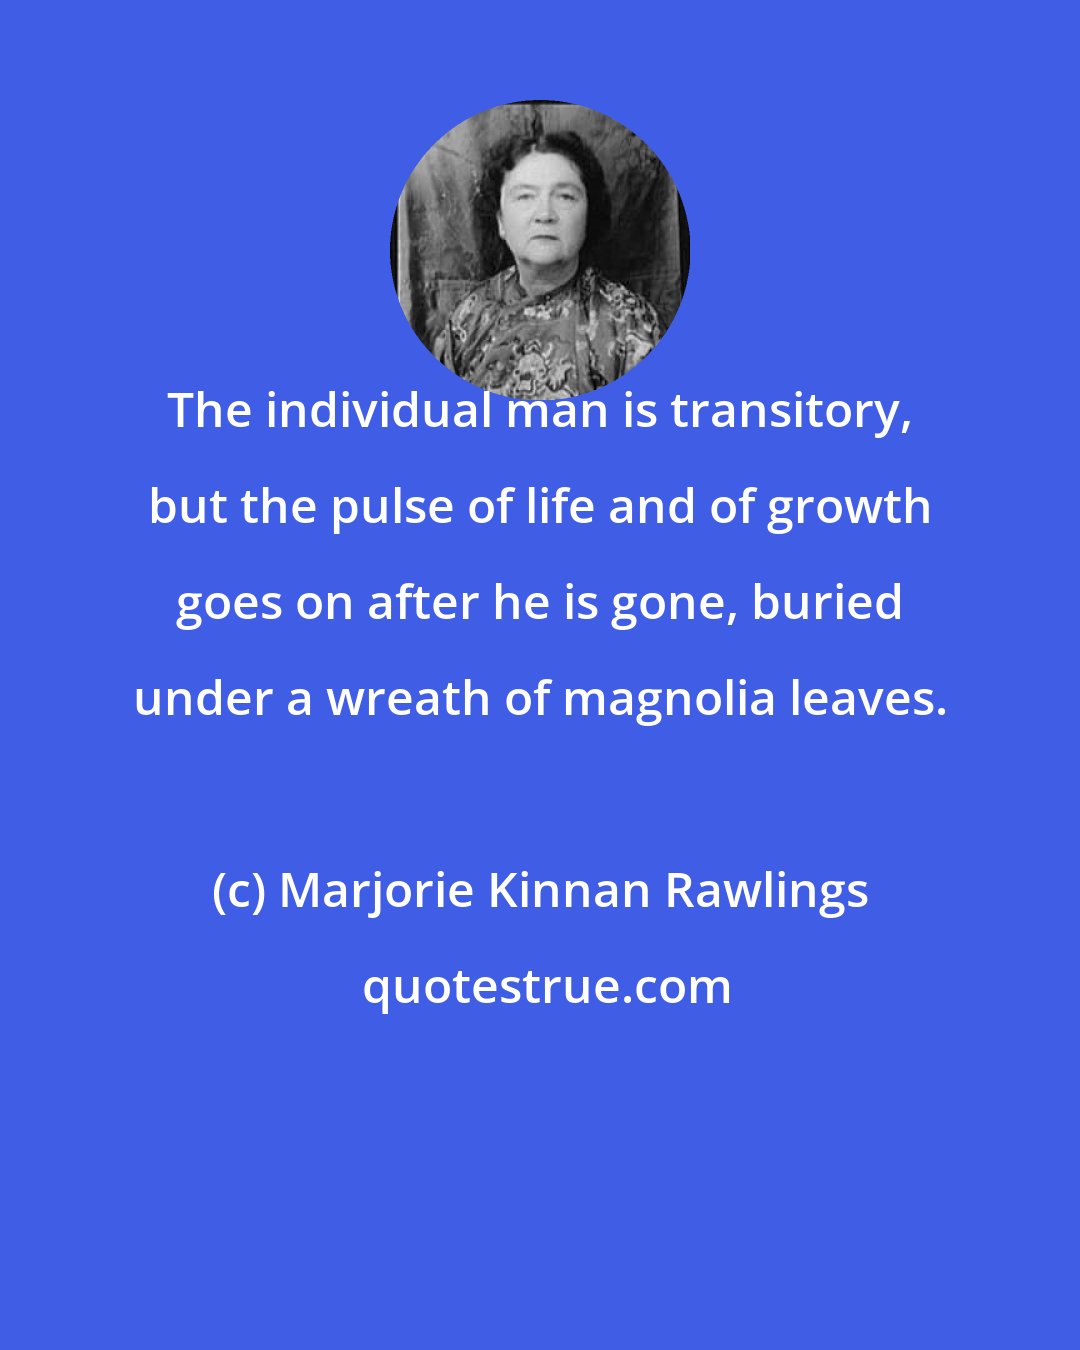 Marjorie Kinnan Rawlings: The individual man is transitory, but the pulse of life and of growth goes on after he is gone, buried under a wreath of magnolia leaves.